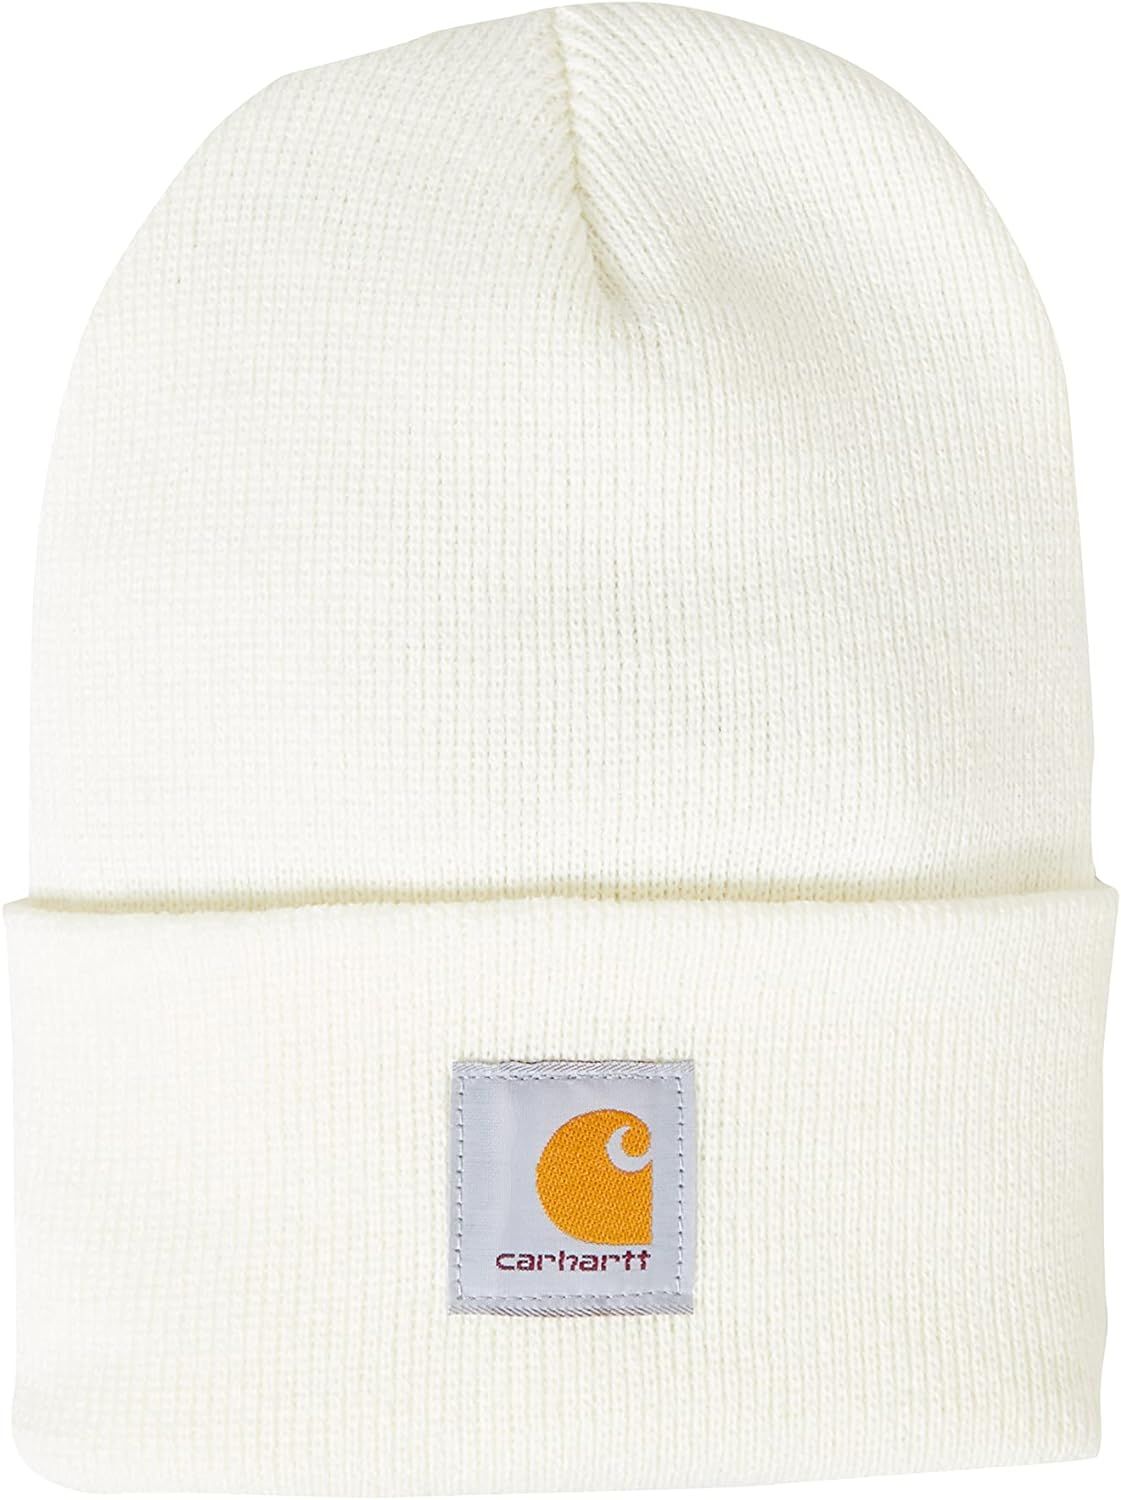 Carhartt Men's Knit Cuffed Beanie, Deep Winter White, One Size at Amazon Men’s Clothing store | Amazon (US)